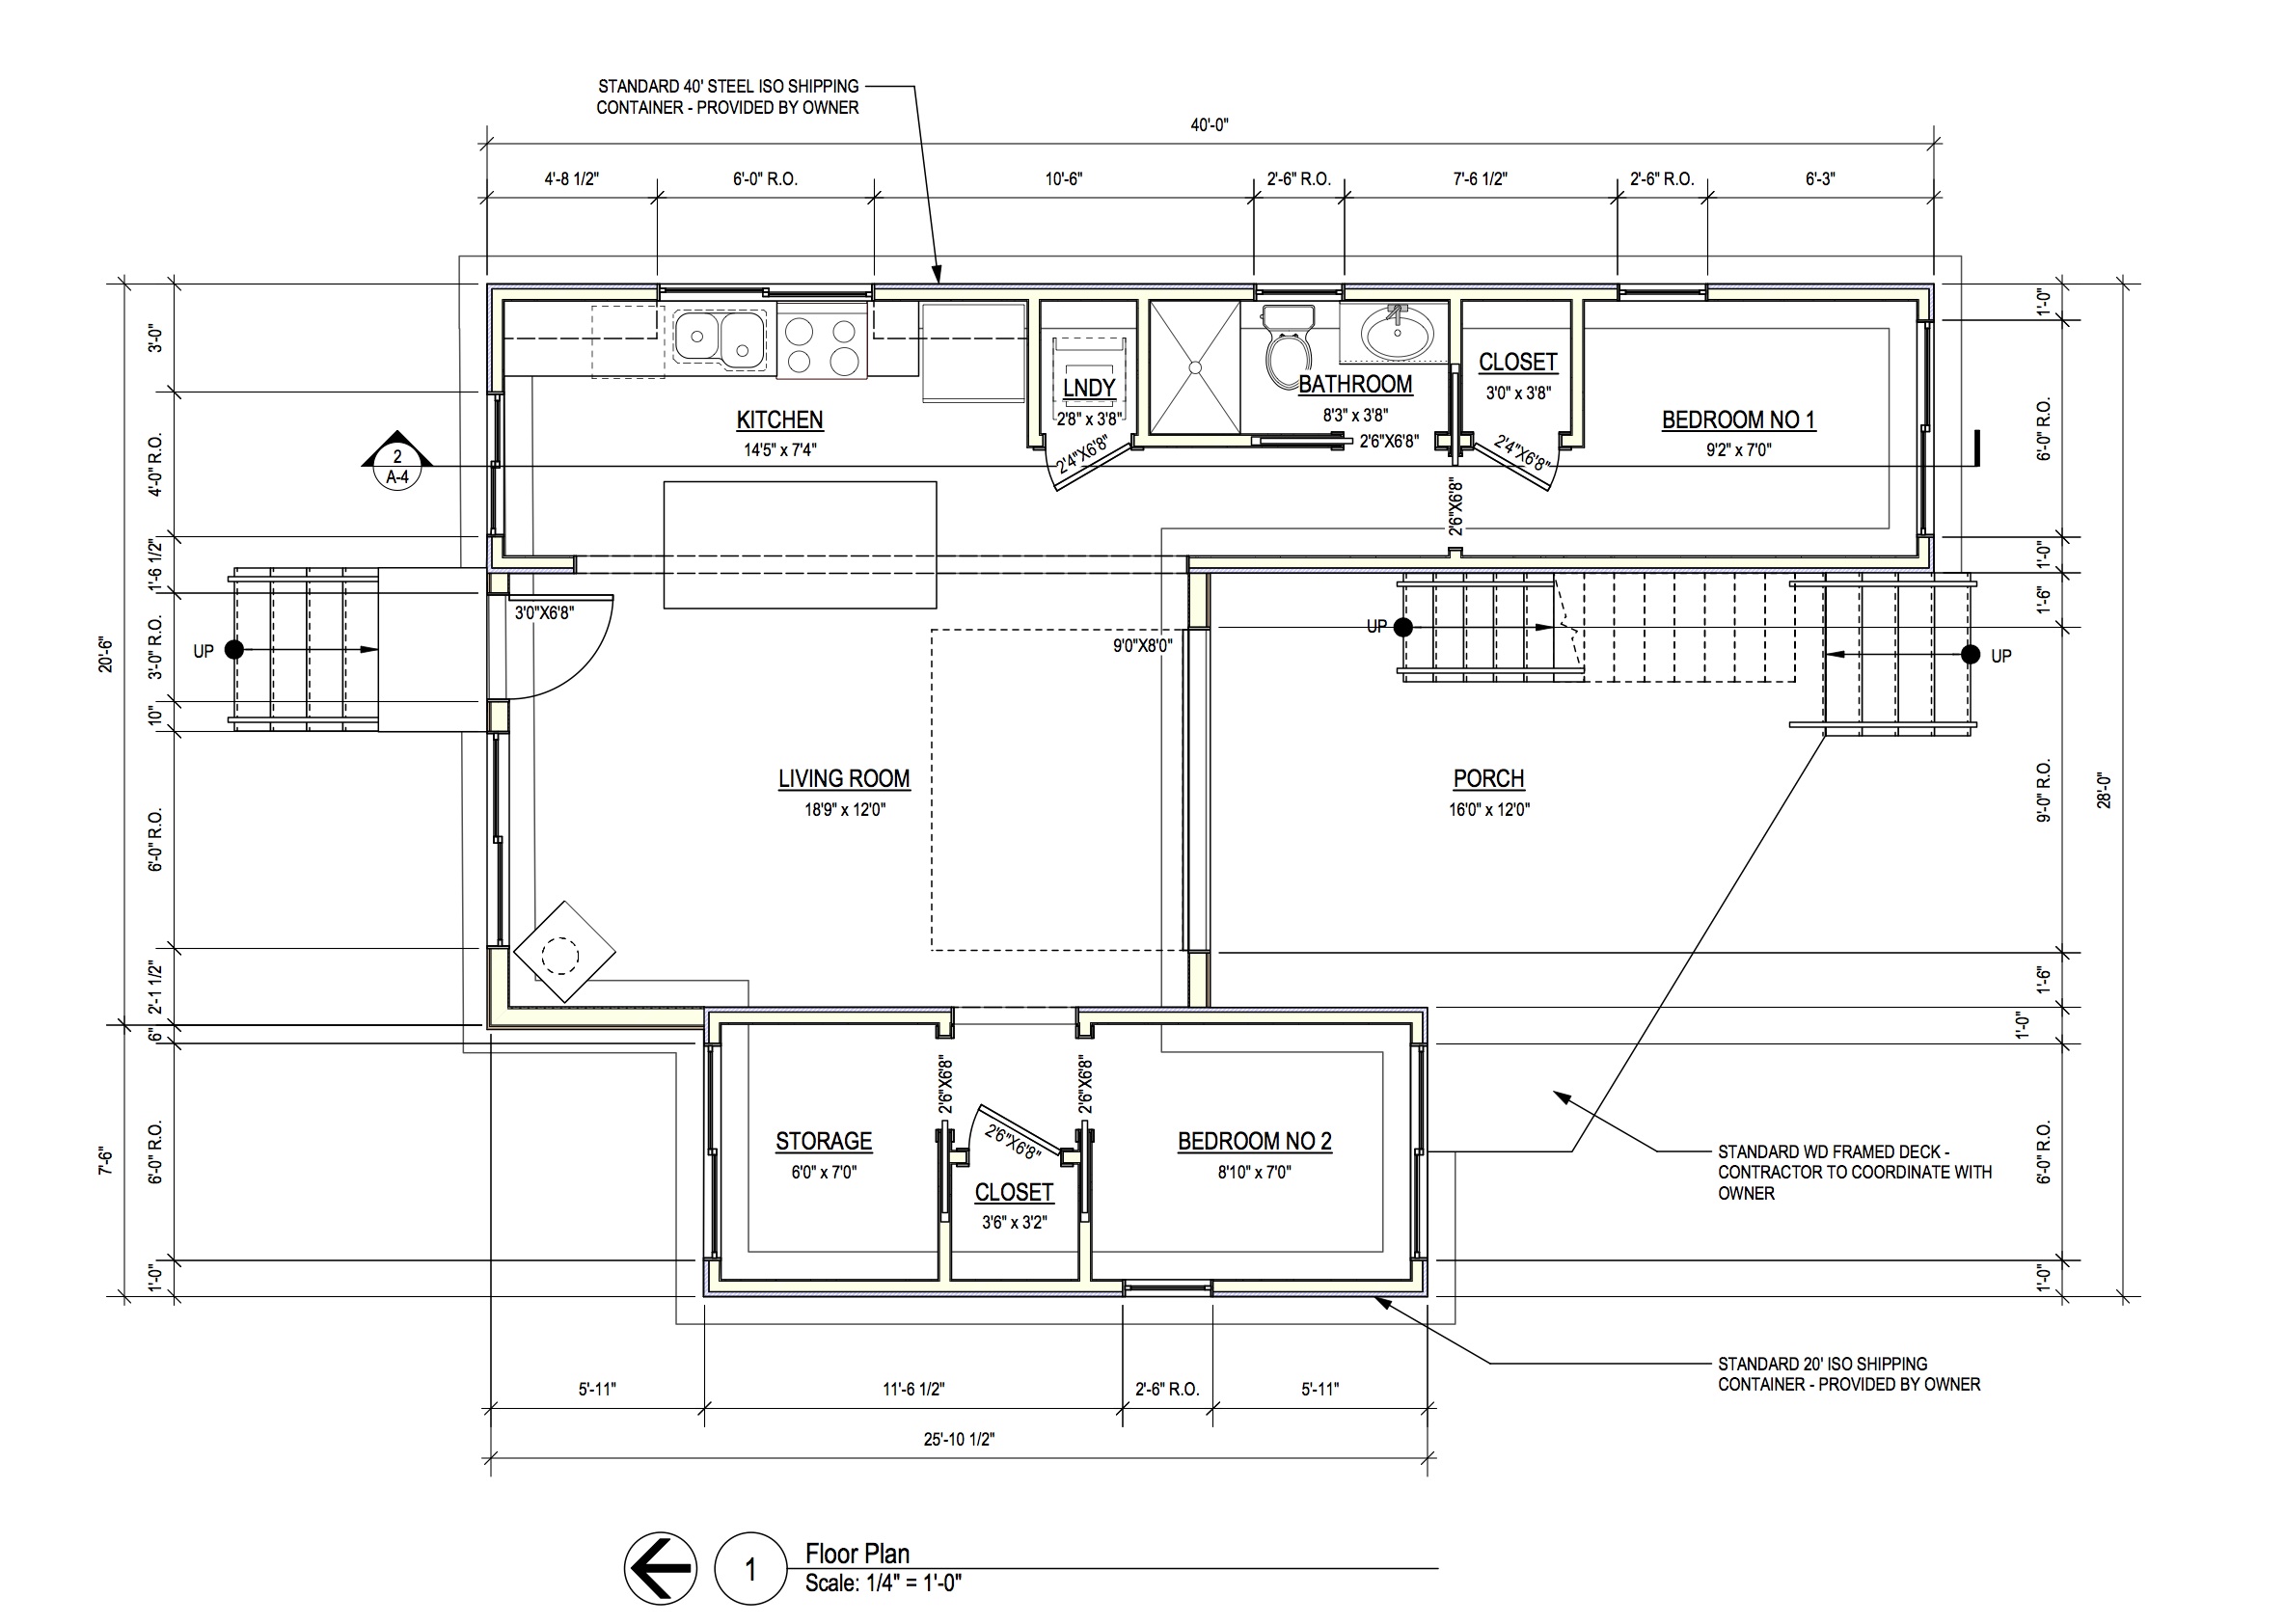 Garage Into Bedroom Plans as well Shipping Container Guest House